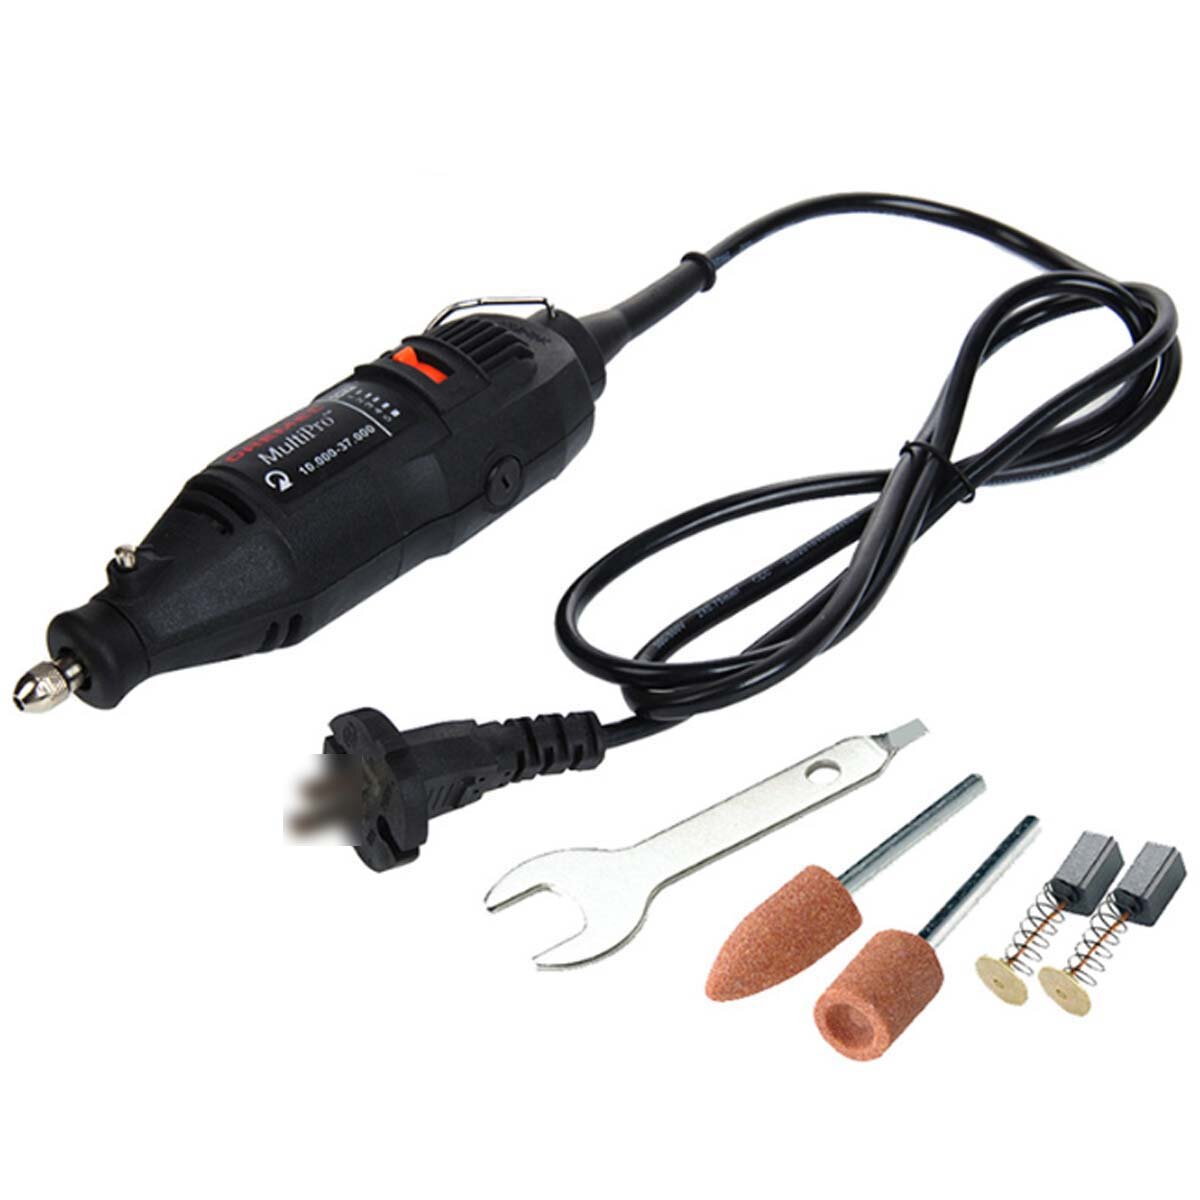 

30000Rmh Electric Drill Grinder Engraver Pen Polishing Grinder Mini Drill Grinding Machine Rotary Tools Accessories